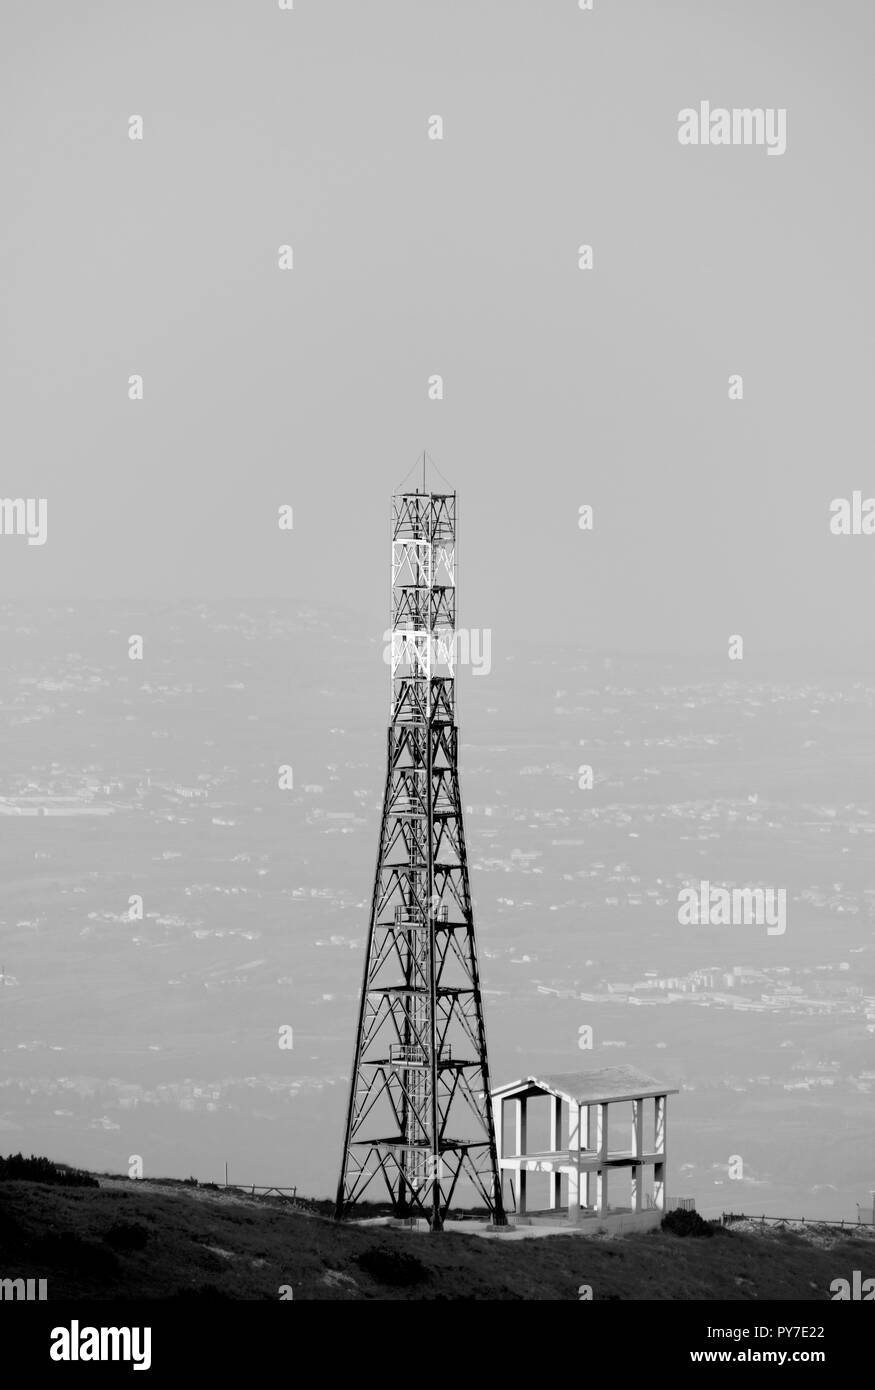 Structural analogy between antenna and building Stock Photo